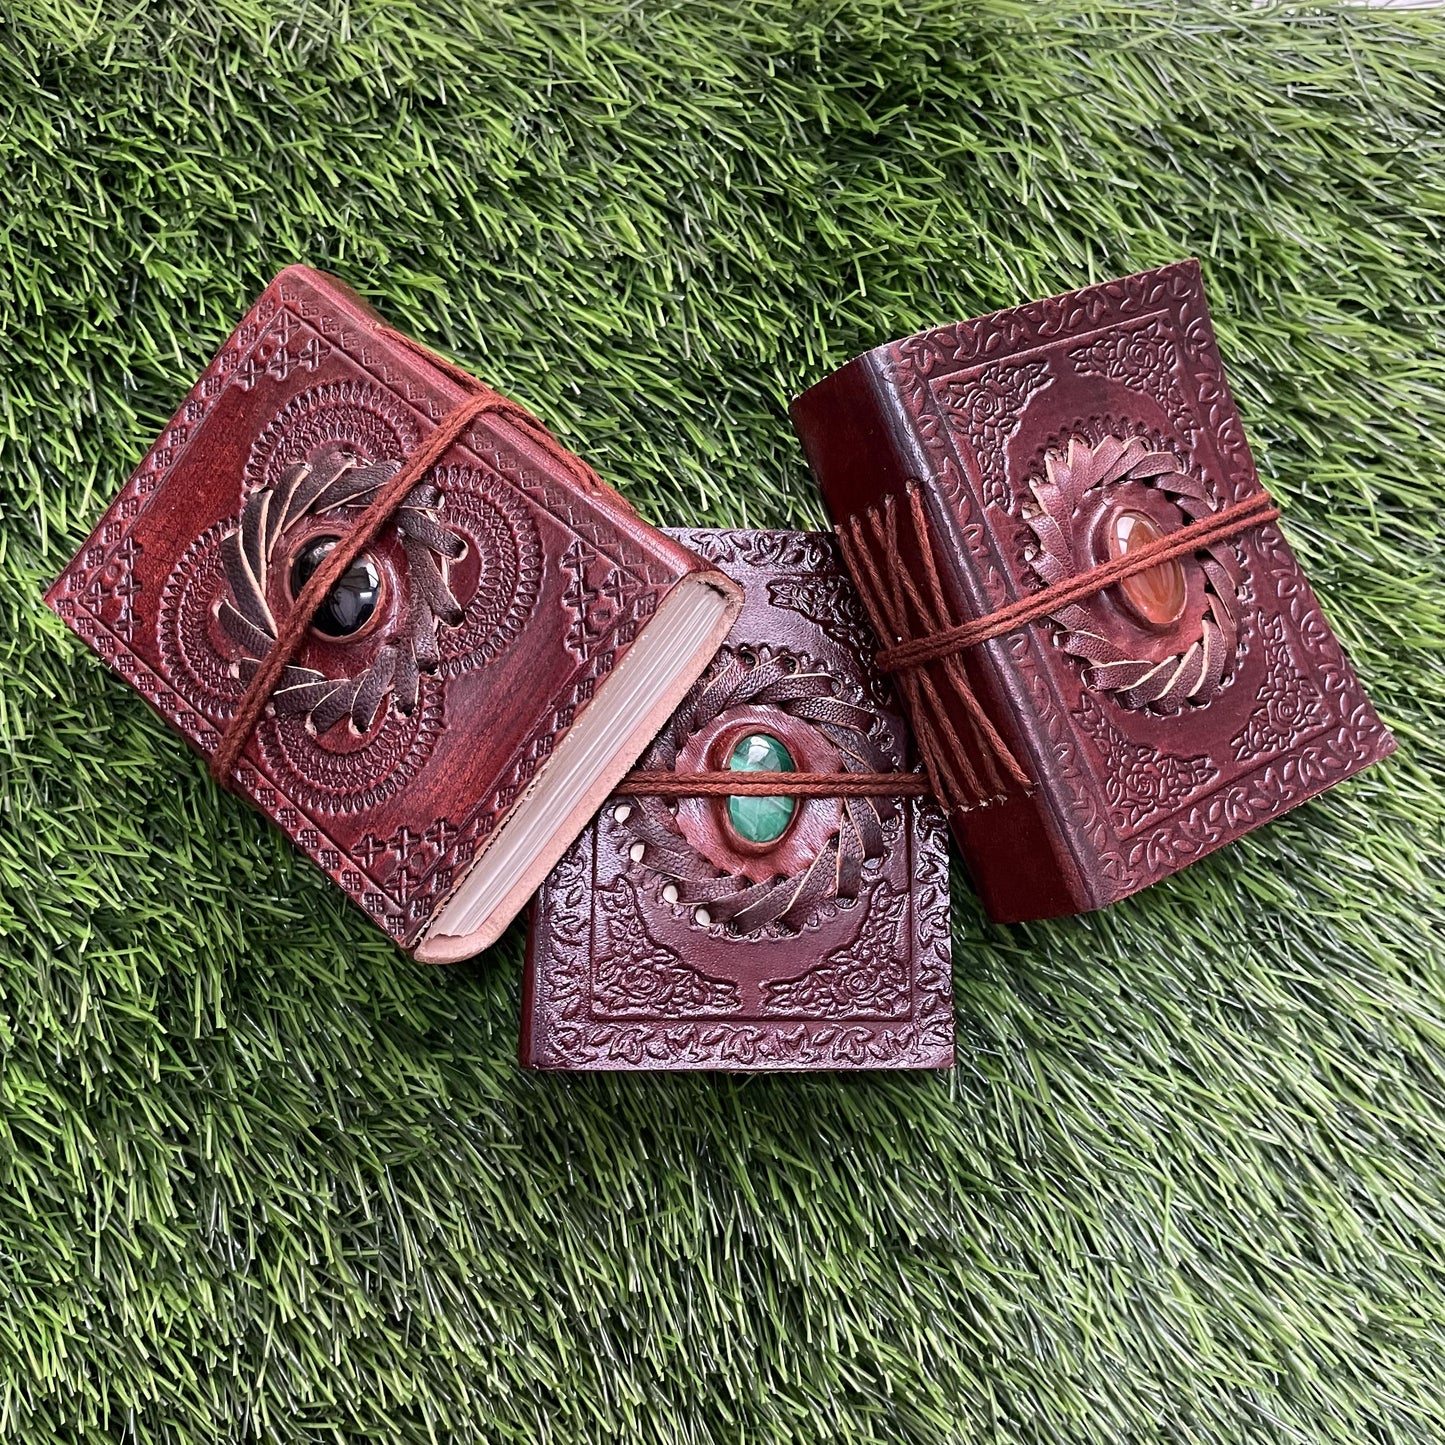 Embellished Leather Diary in a Compact 4x3 Inch Size" With Natural Gemstone